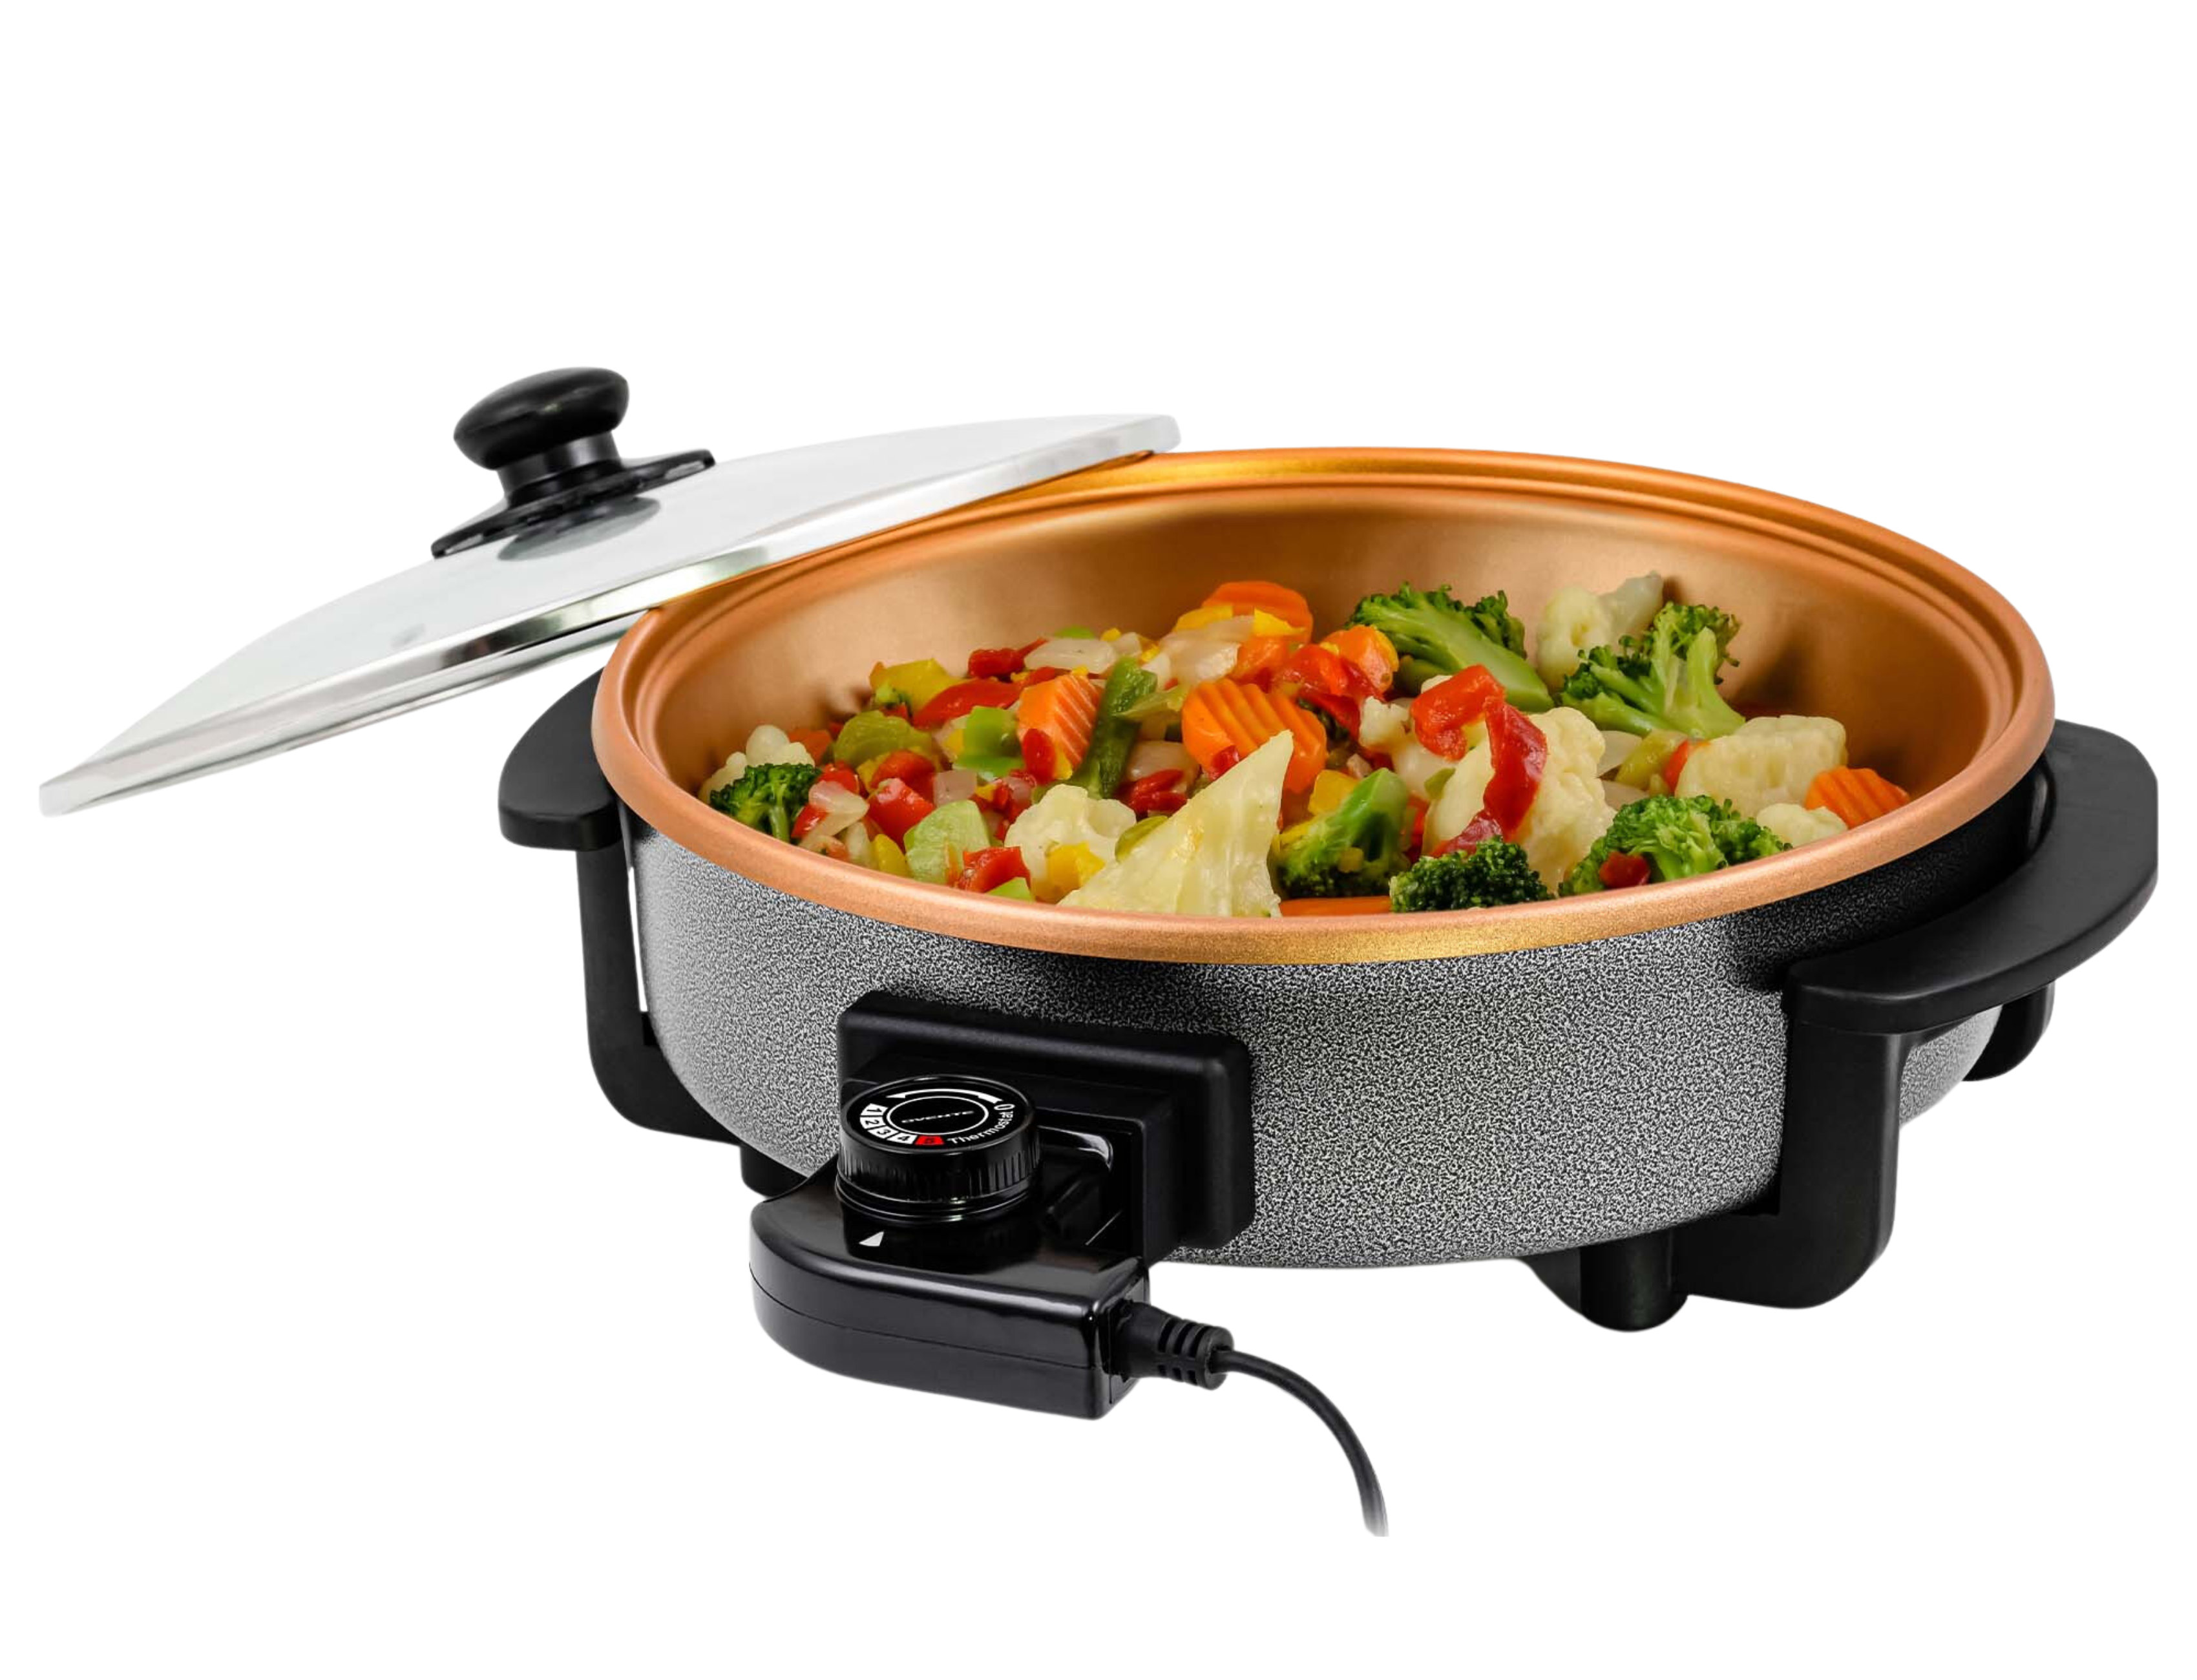 Presto Electric Skillet - household items - by owner - housewares